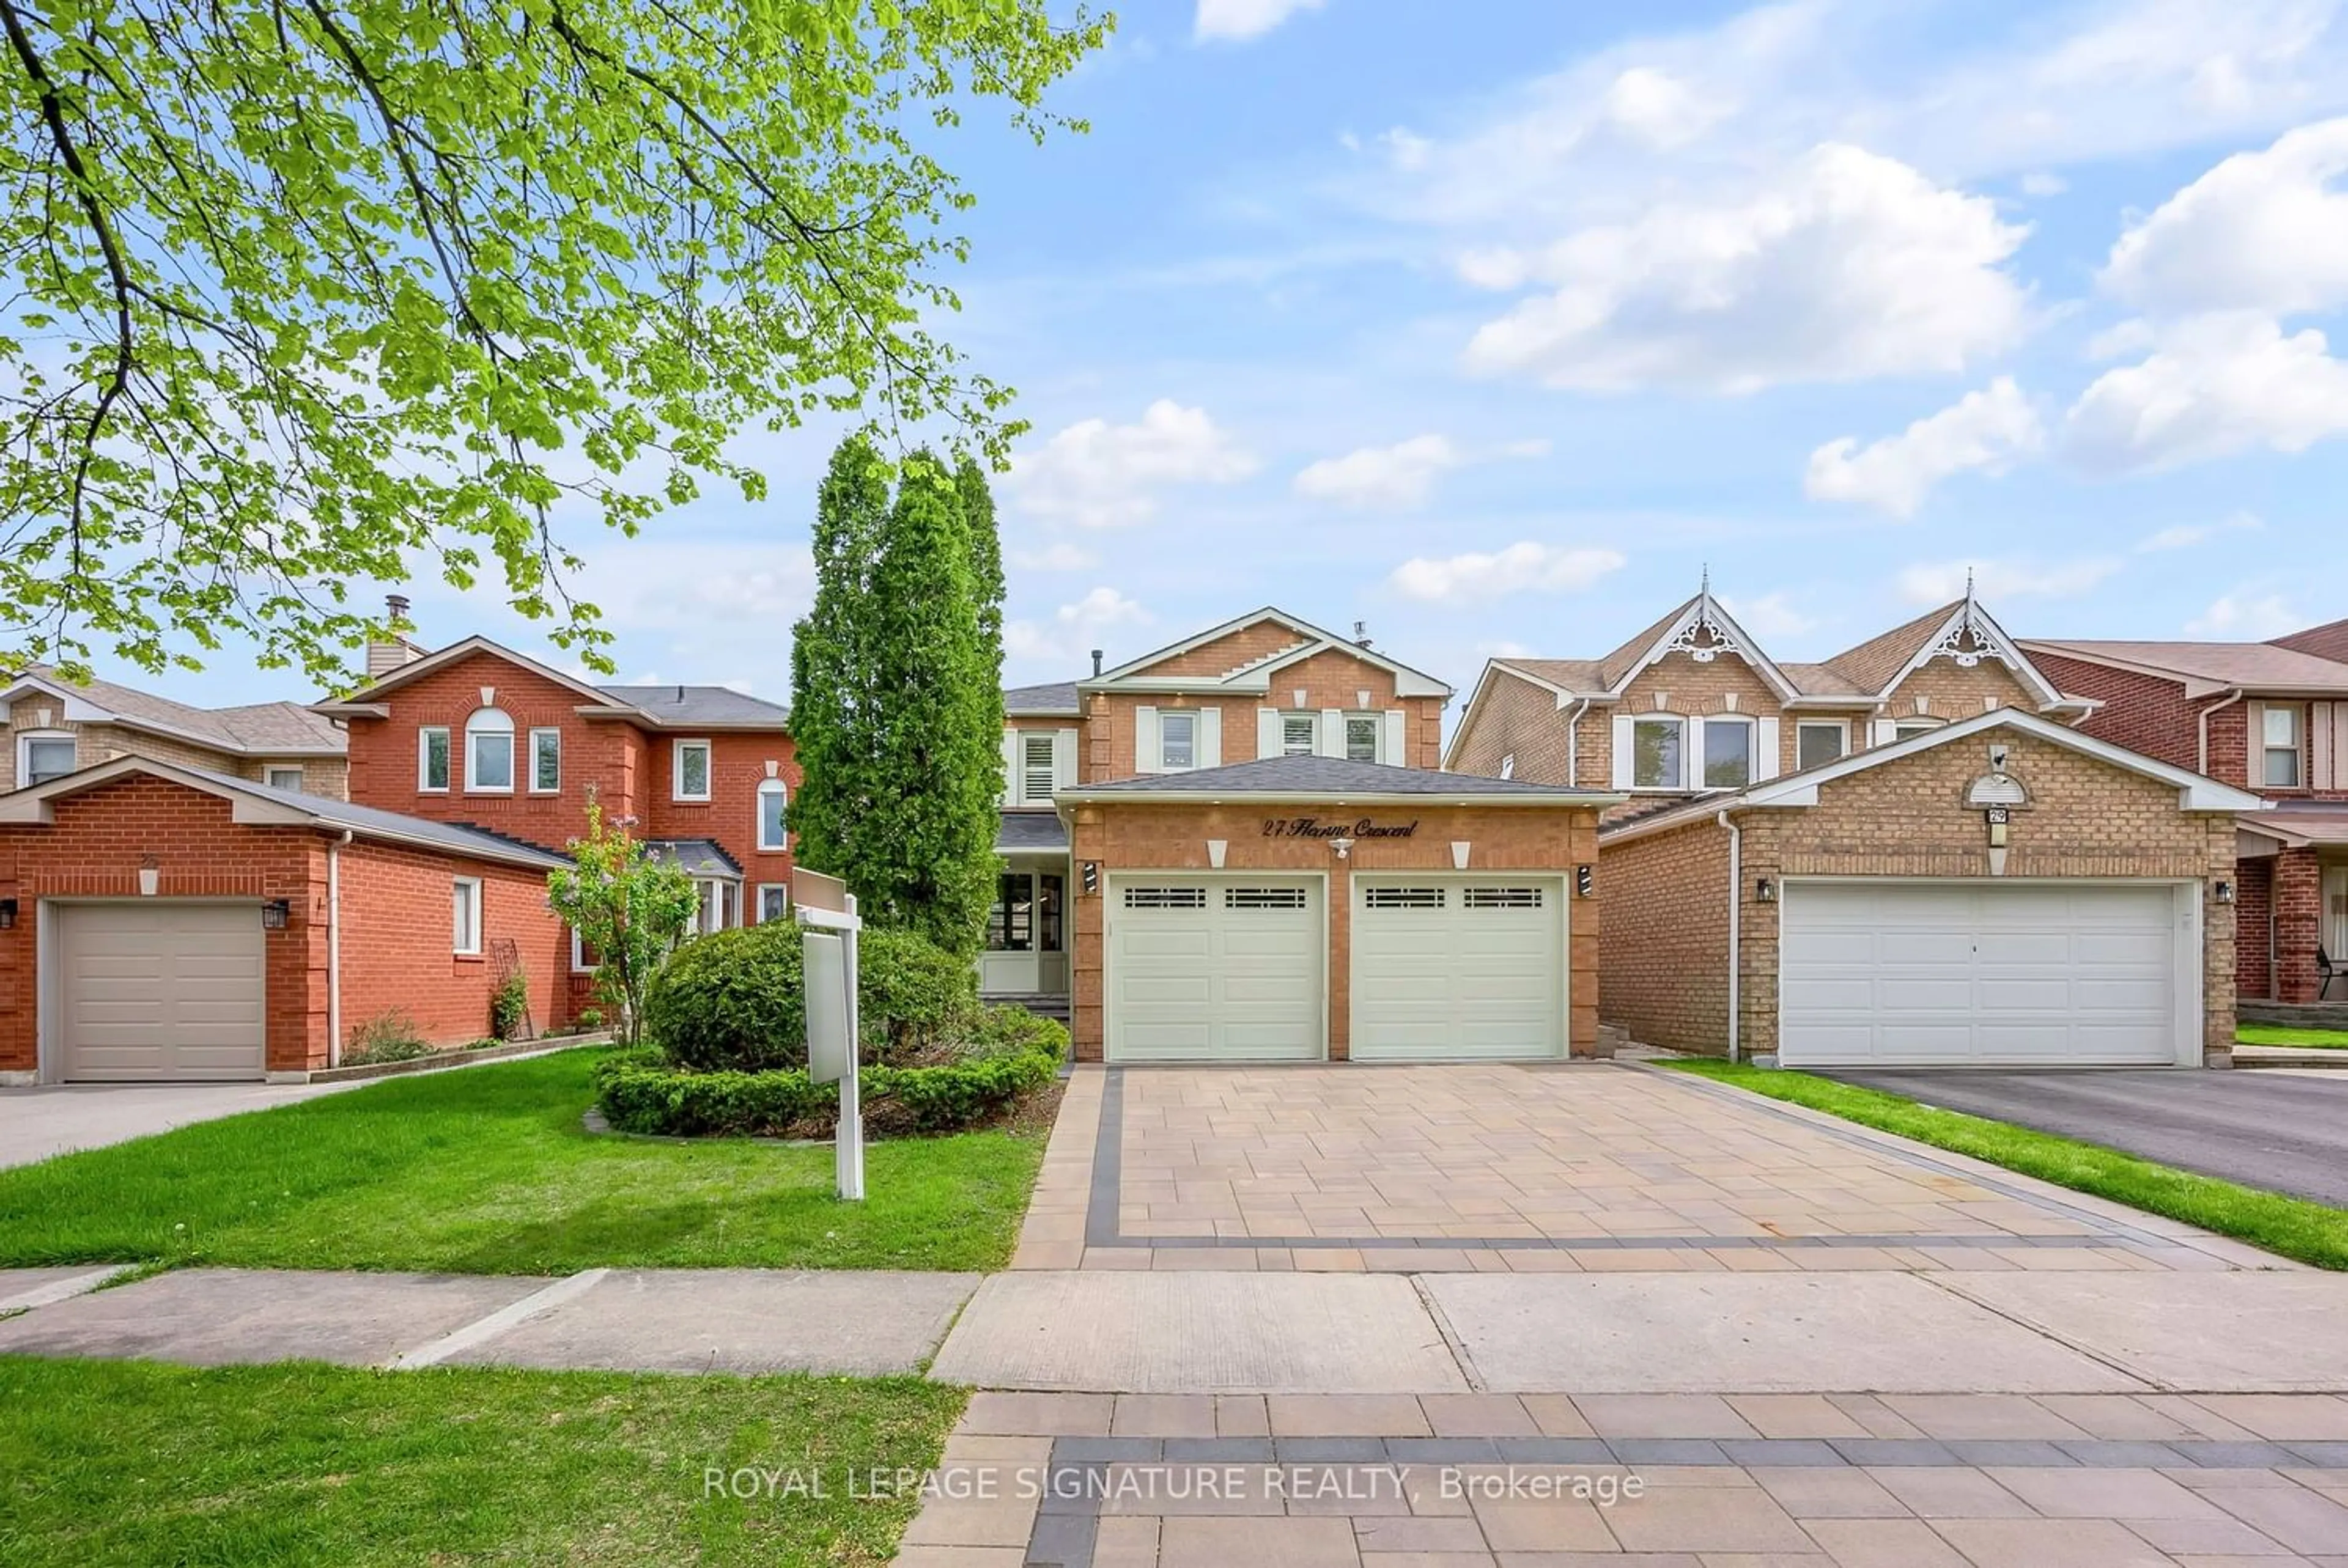 Home with brick exterior material for 27 Hearne Cres, Ajax Ontario L1T 3P5